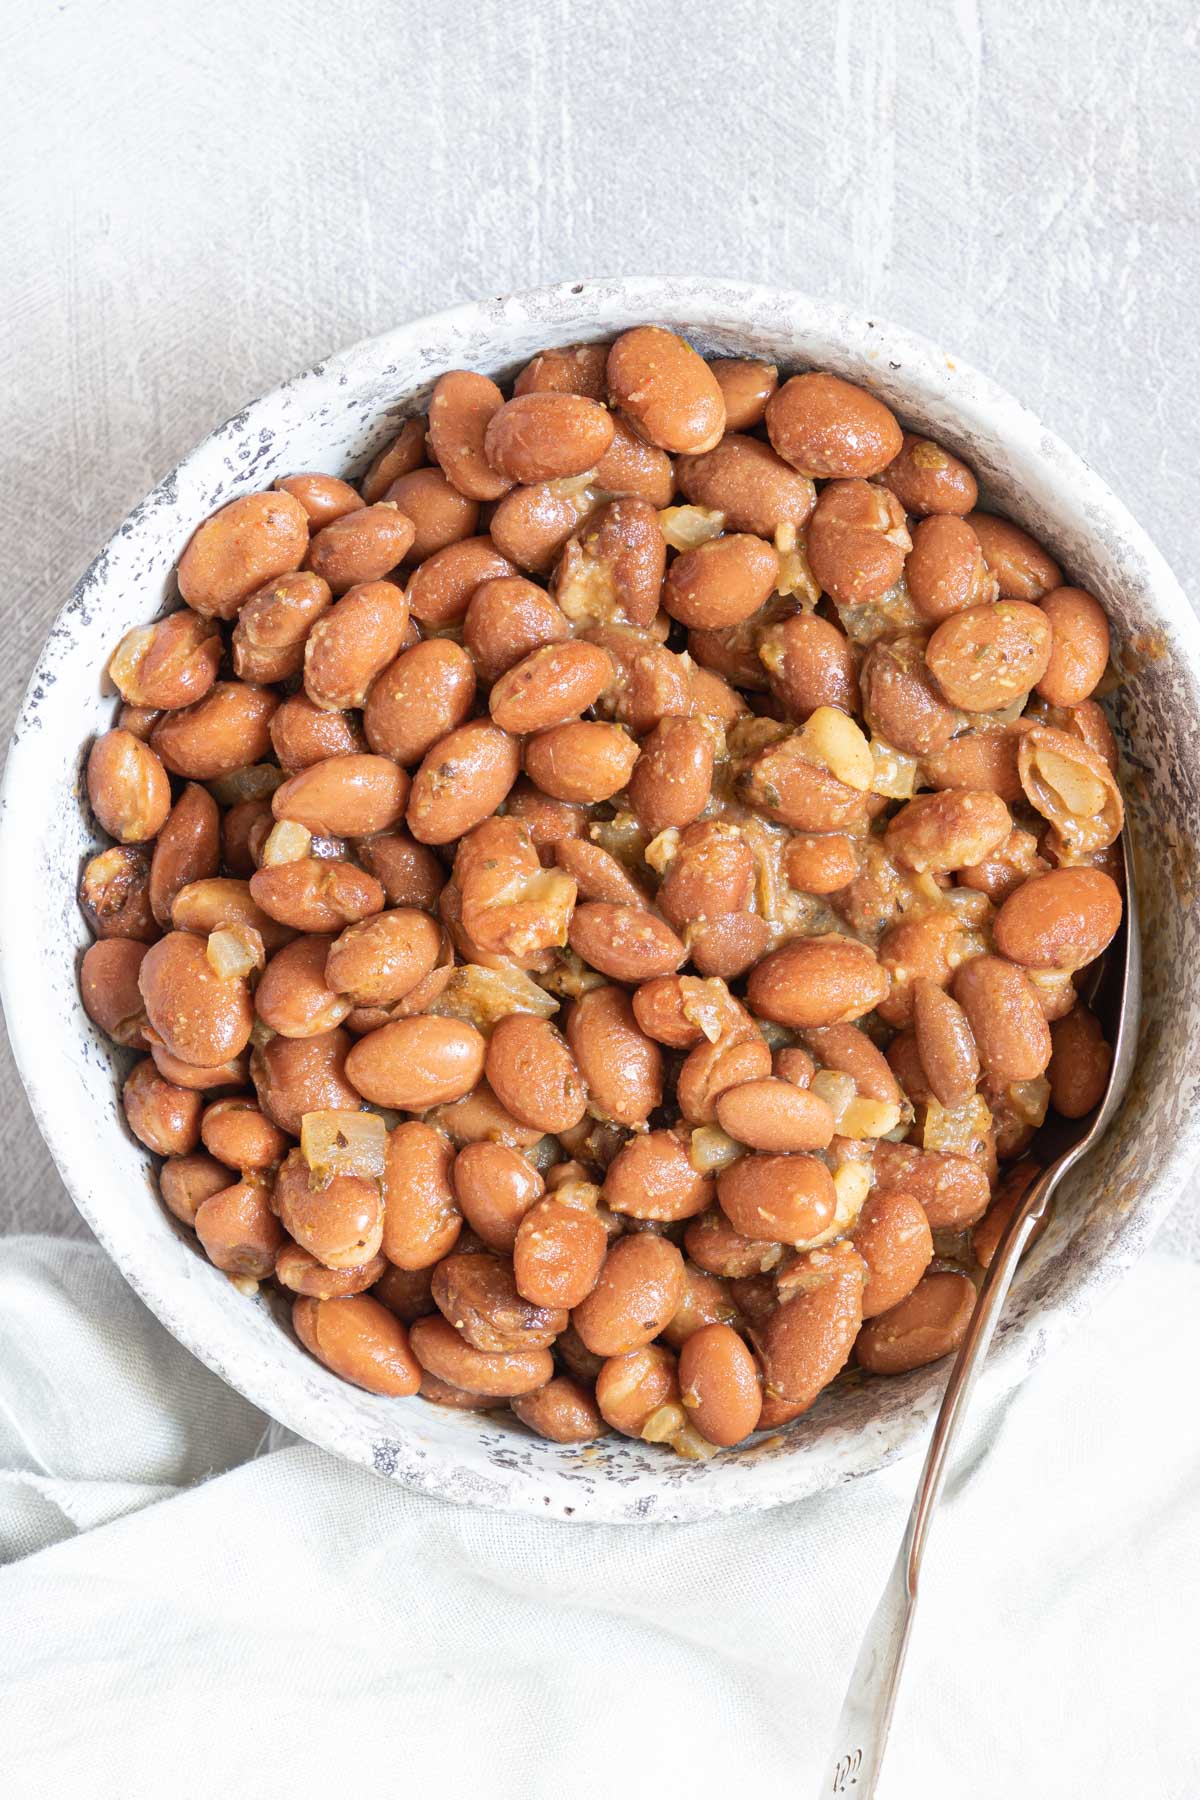 the completed how to season pinto beans recipe served in a ceramic bowl with a spoon inside